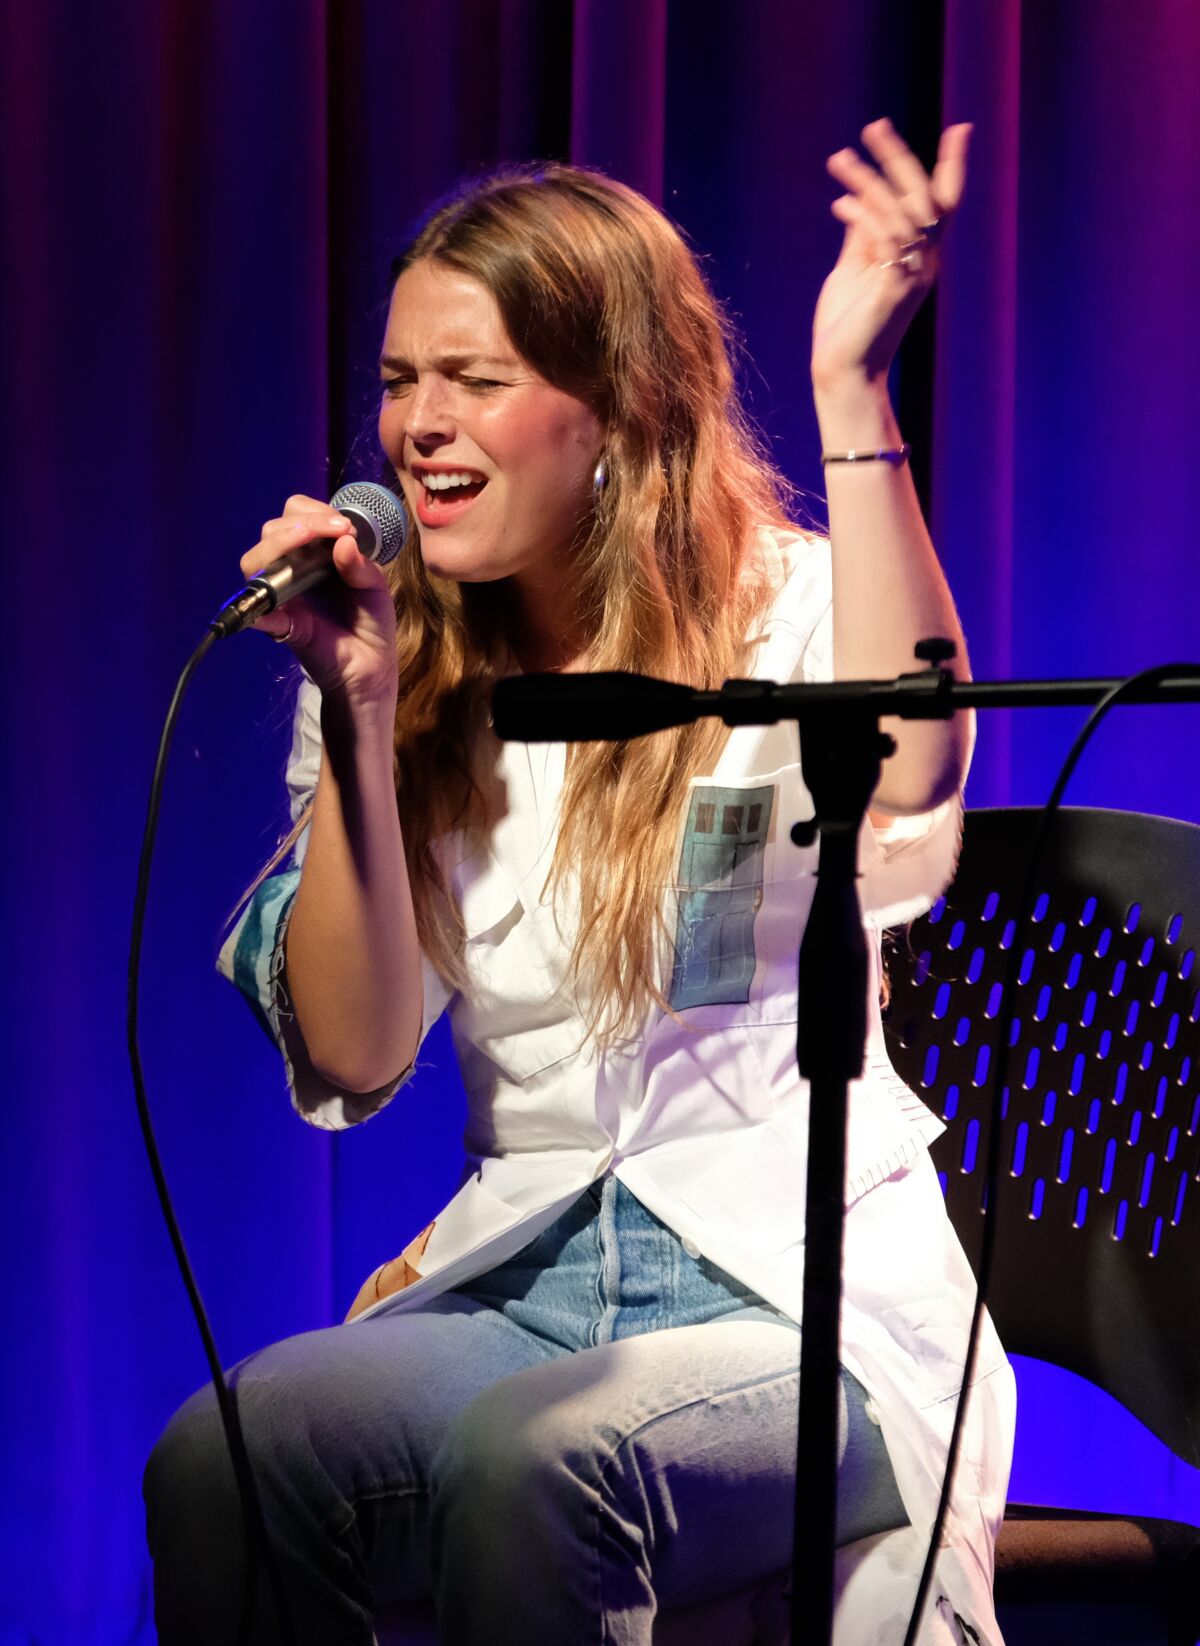 Maggie Rogers performs at The GRAMMY Museum on September 15, 2019 in Los Angeles, California.